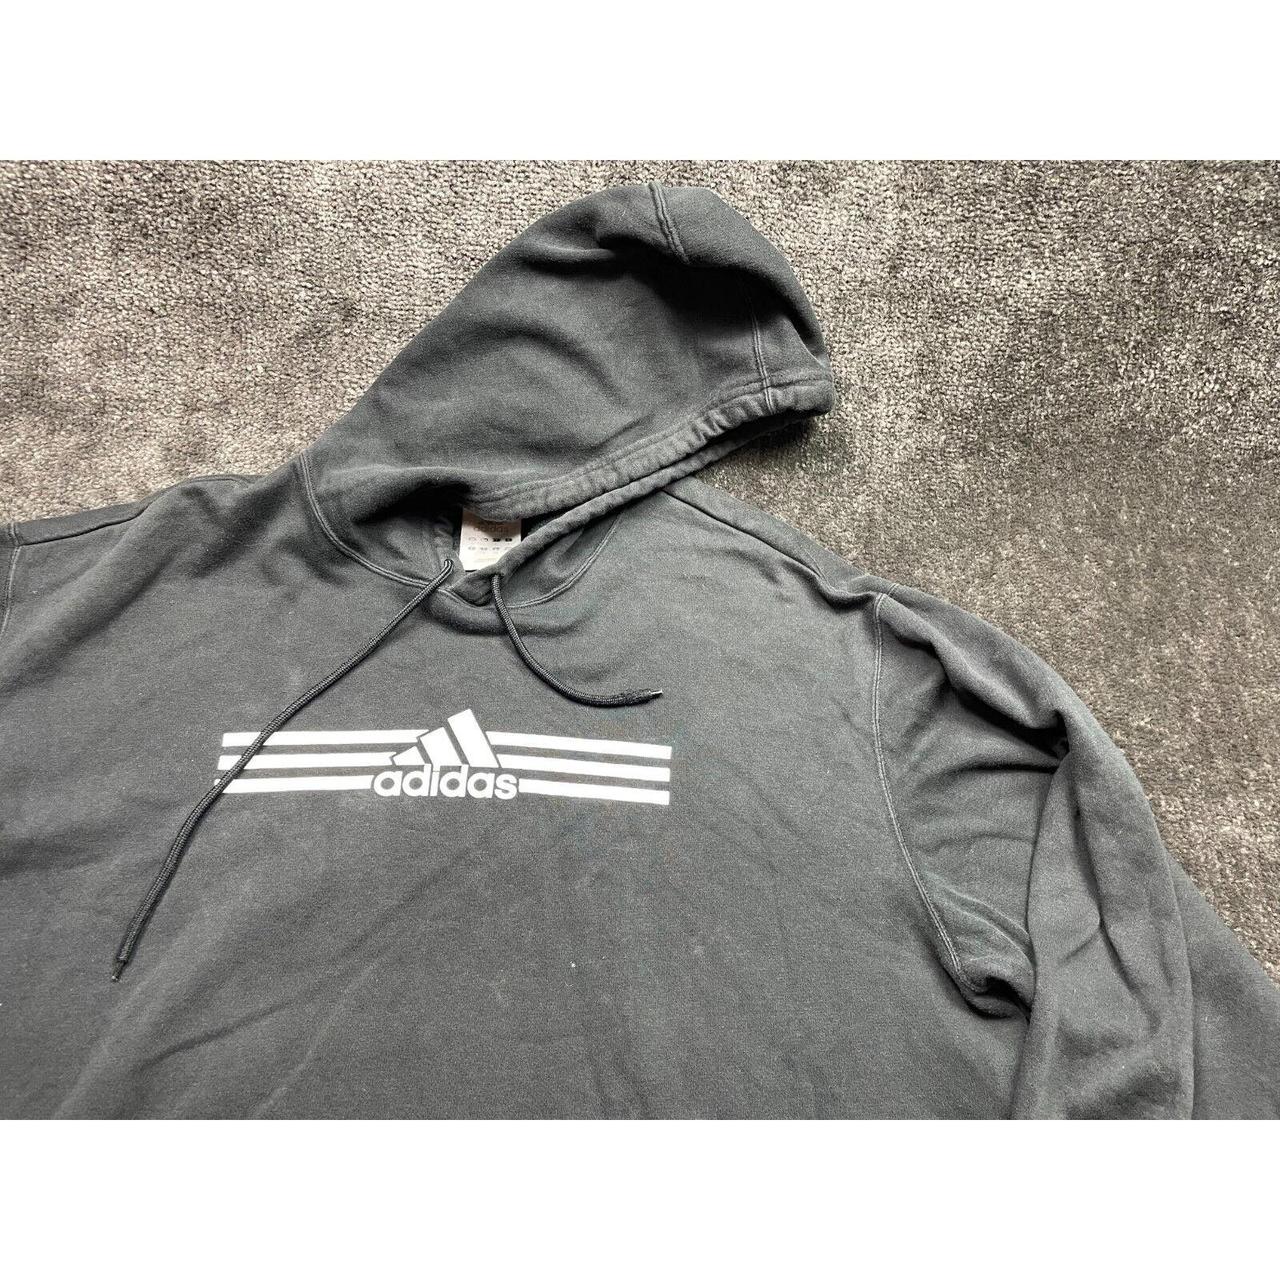 Solid Hoodies & Sweatshirts for Men with Vintage for Sale